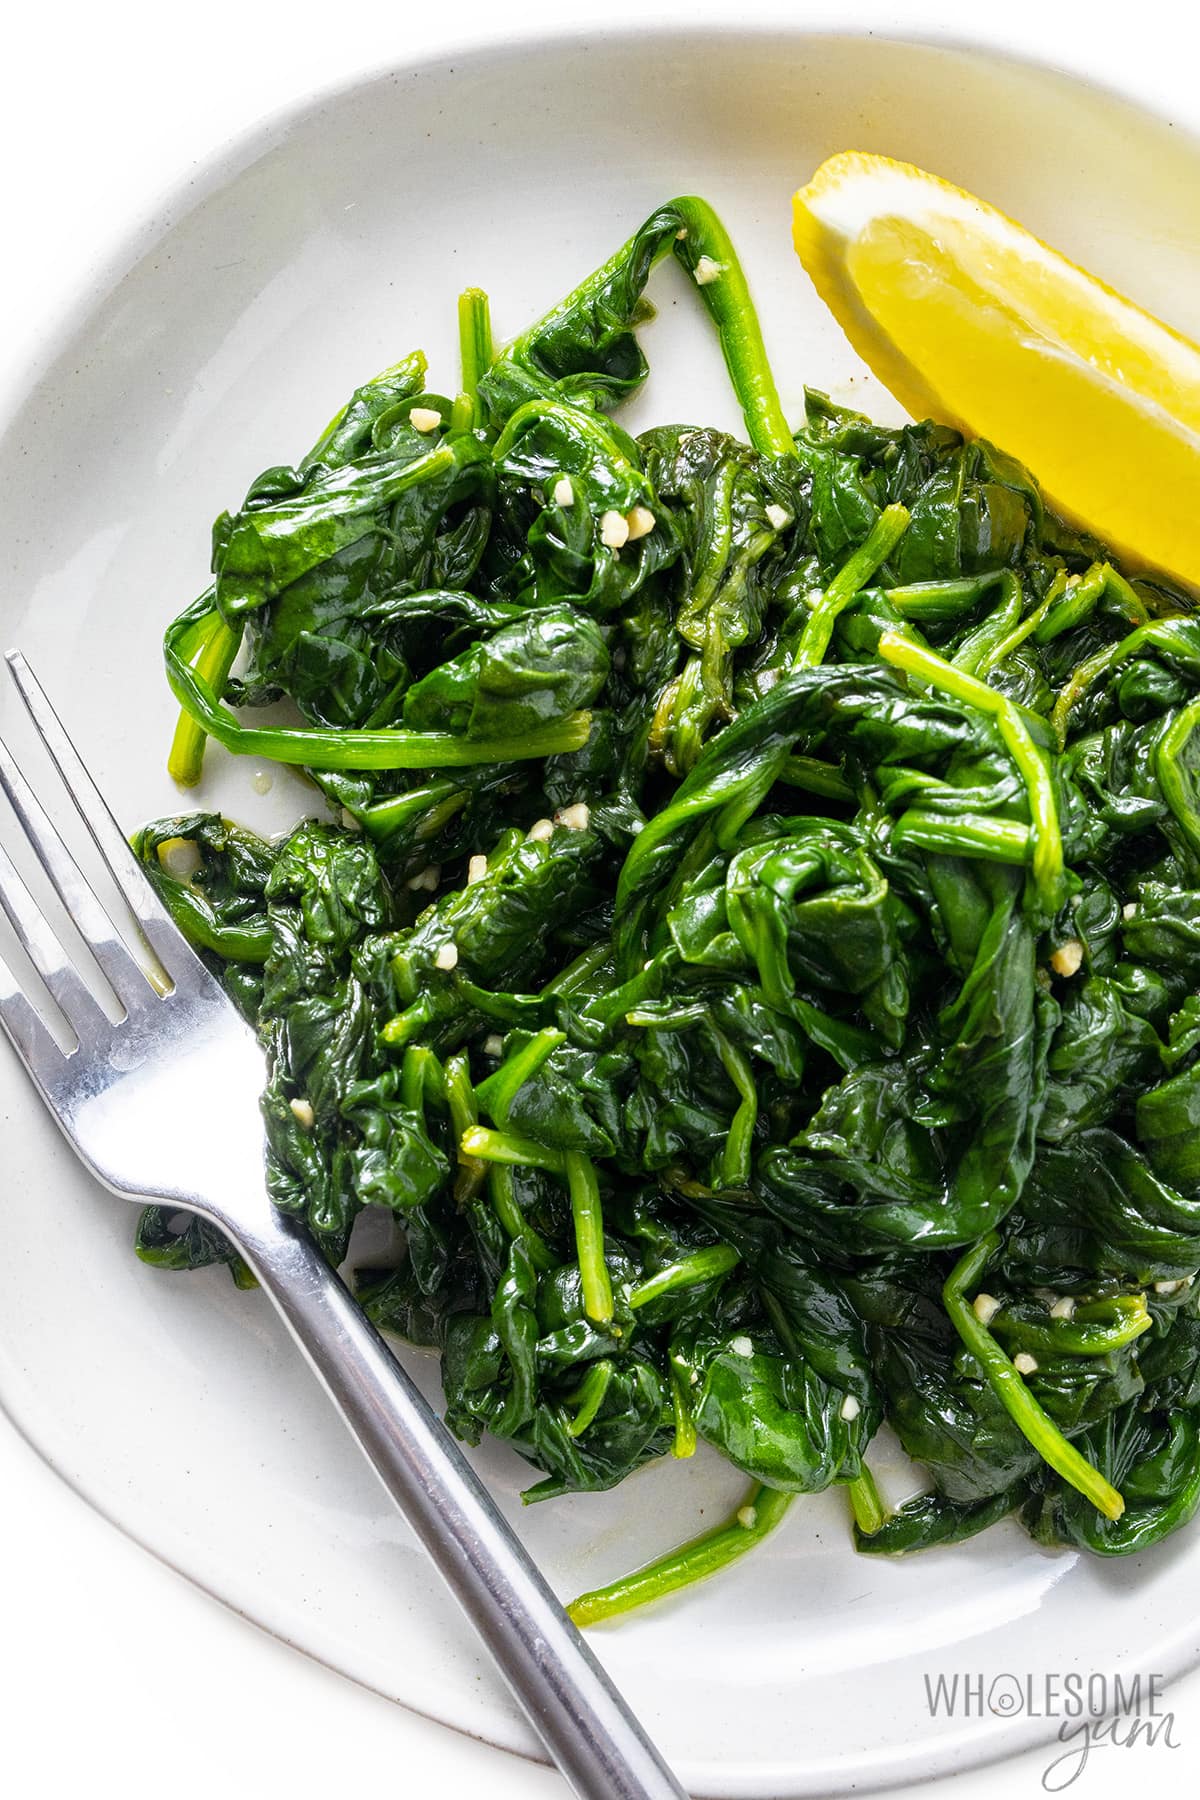 Sauteed spinach with garlic on a plate with a fork and a lemon.